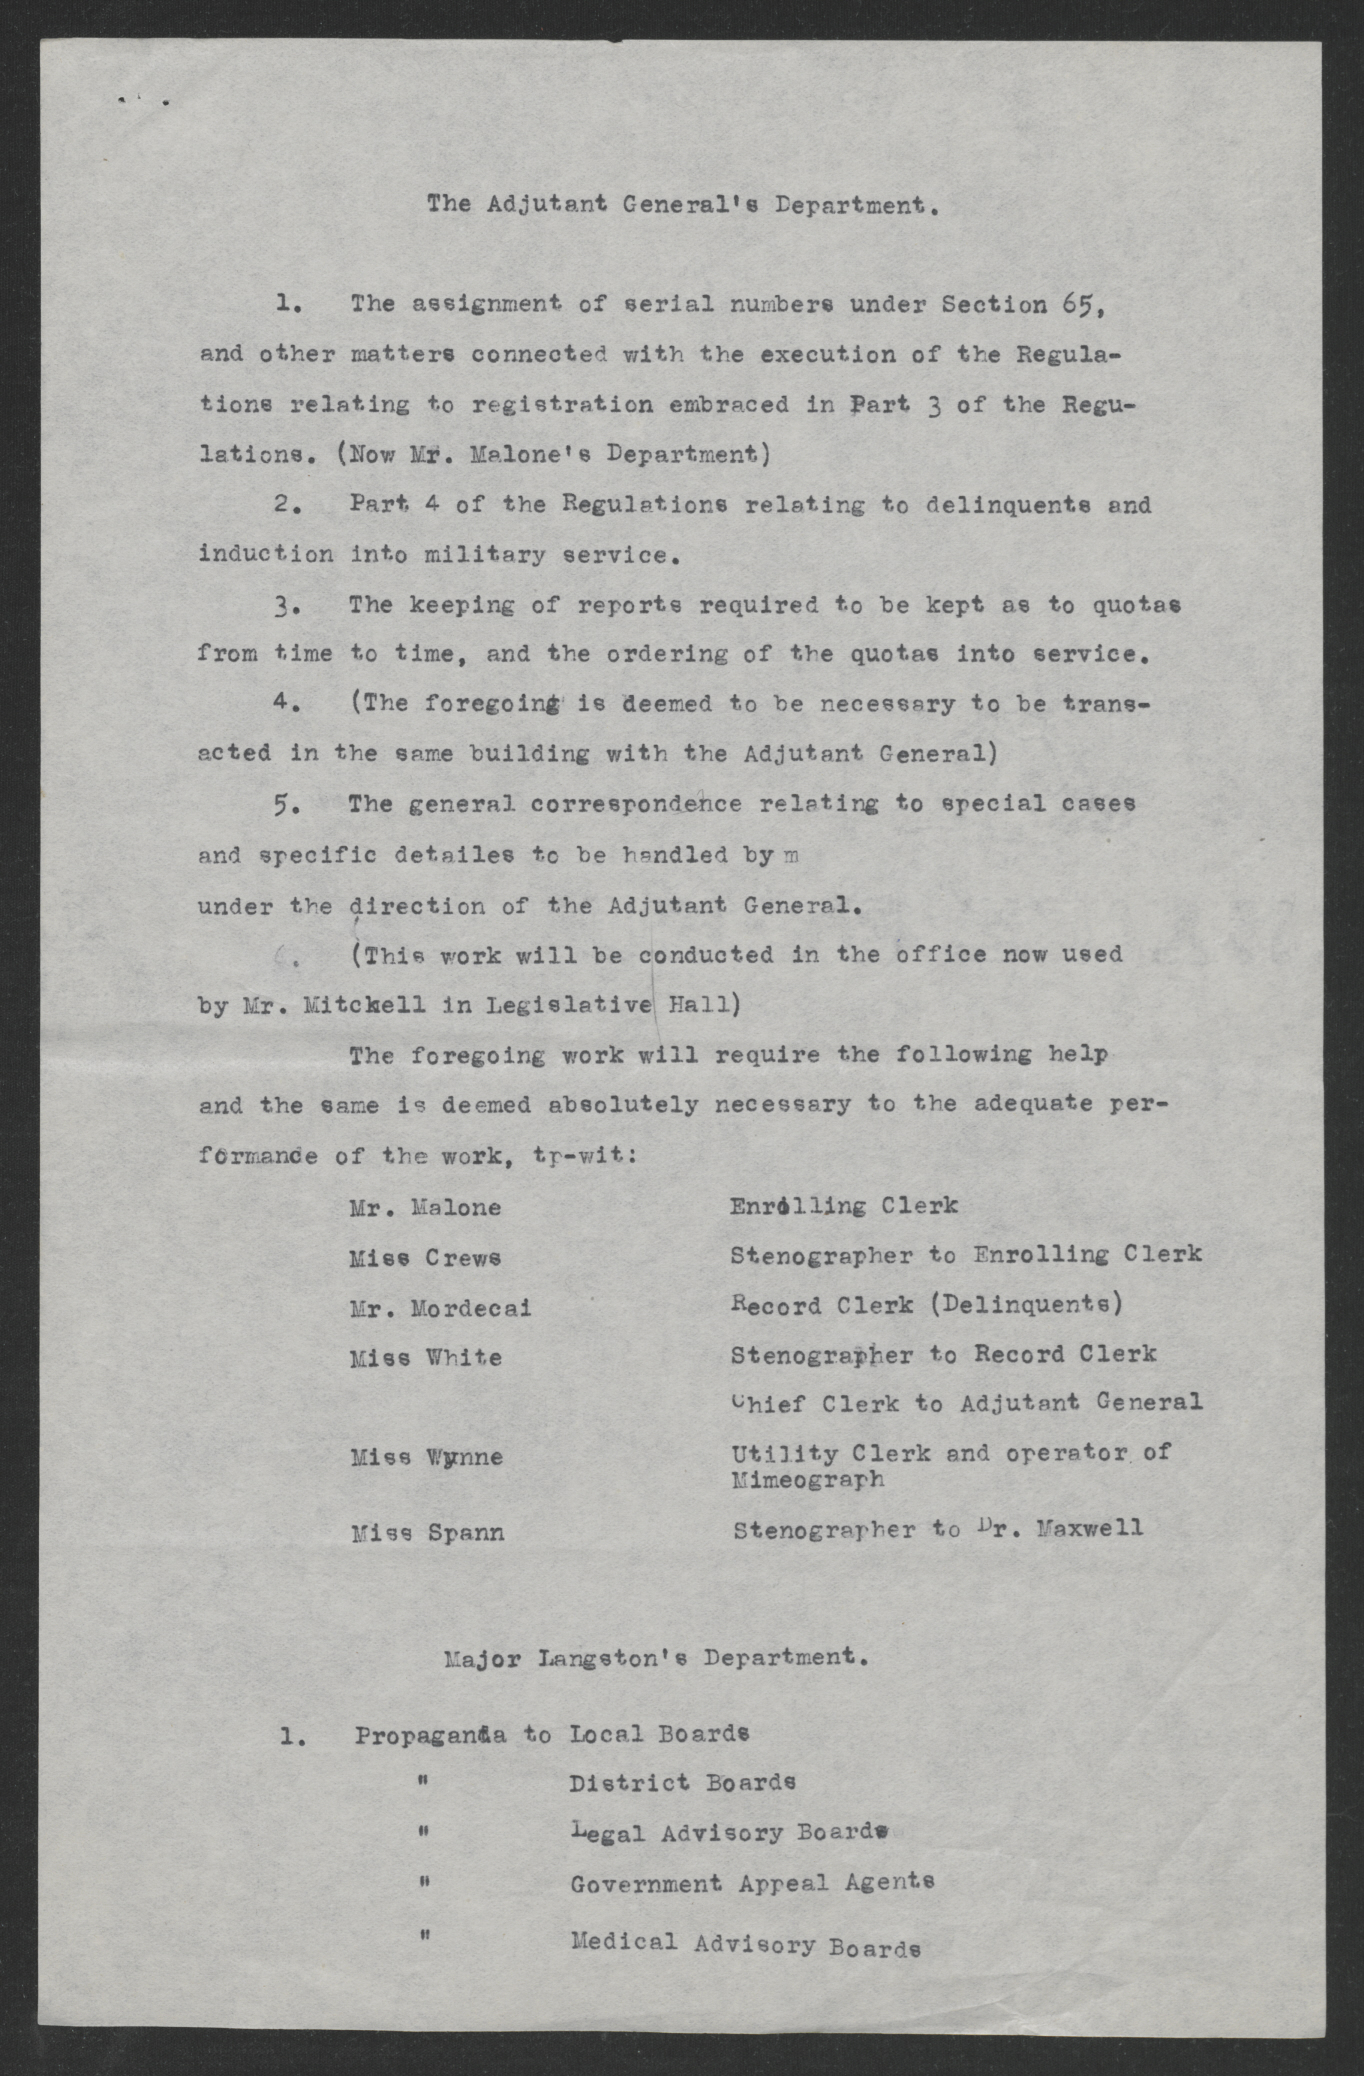 Division of Draft Work between Laurence W. Young and John D. Langston, Circa 1918, page 1